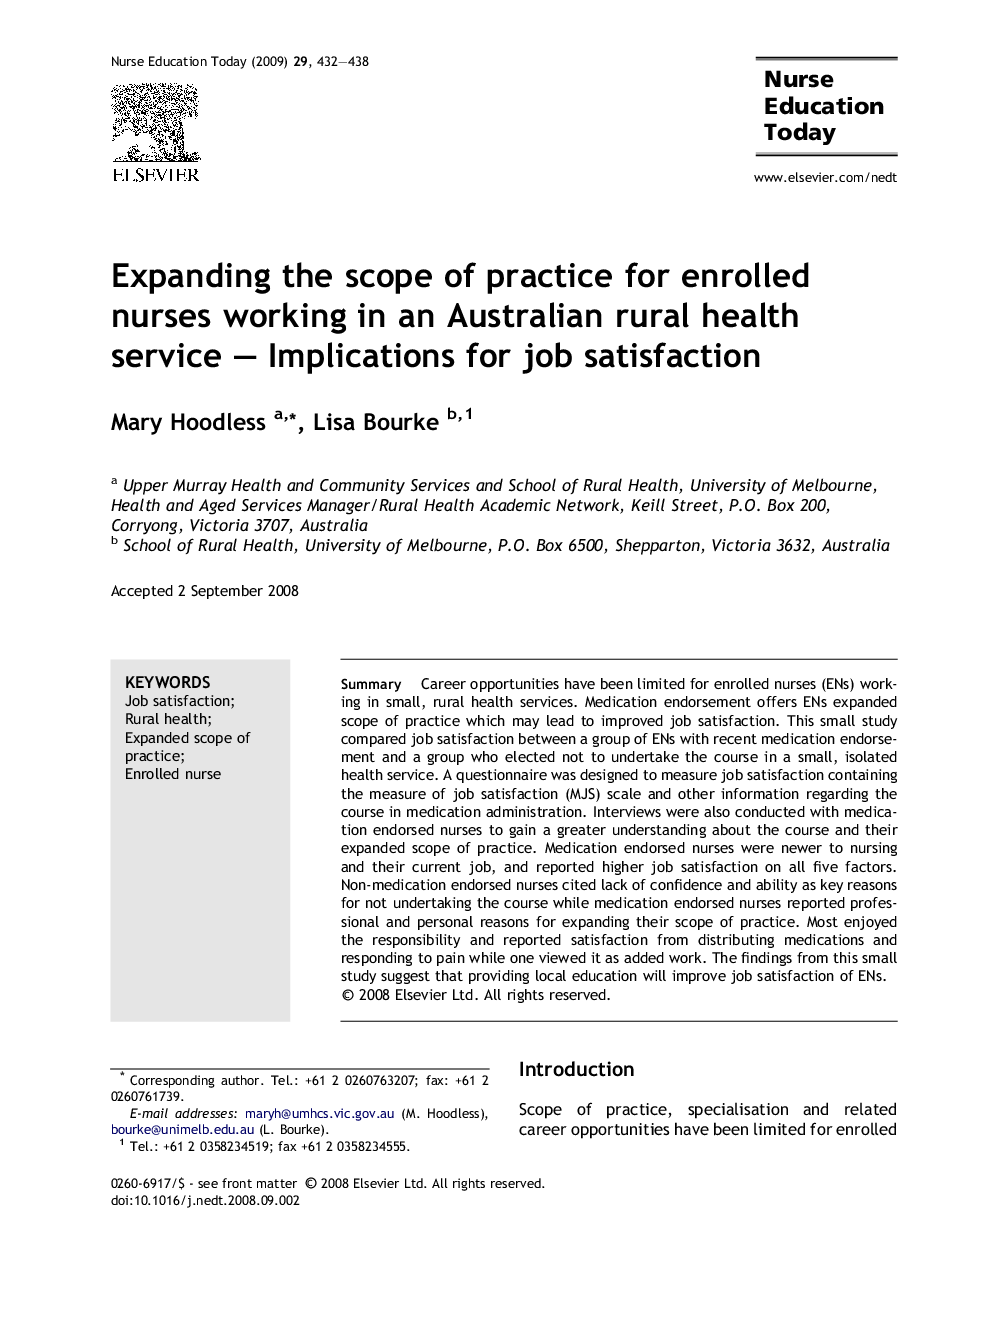 Expanding the scope of practice for enrolled nurses working in an Australian rural health service – Implications for job satisfaction